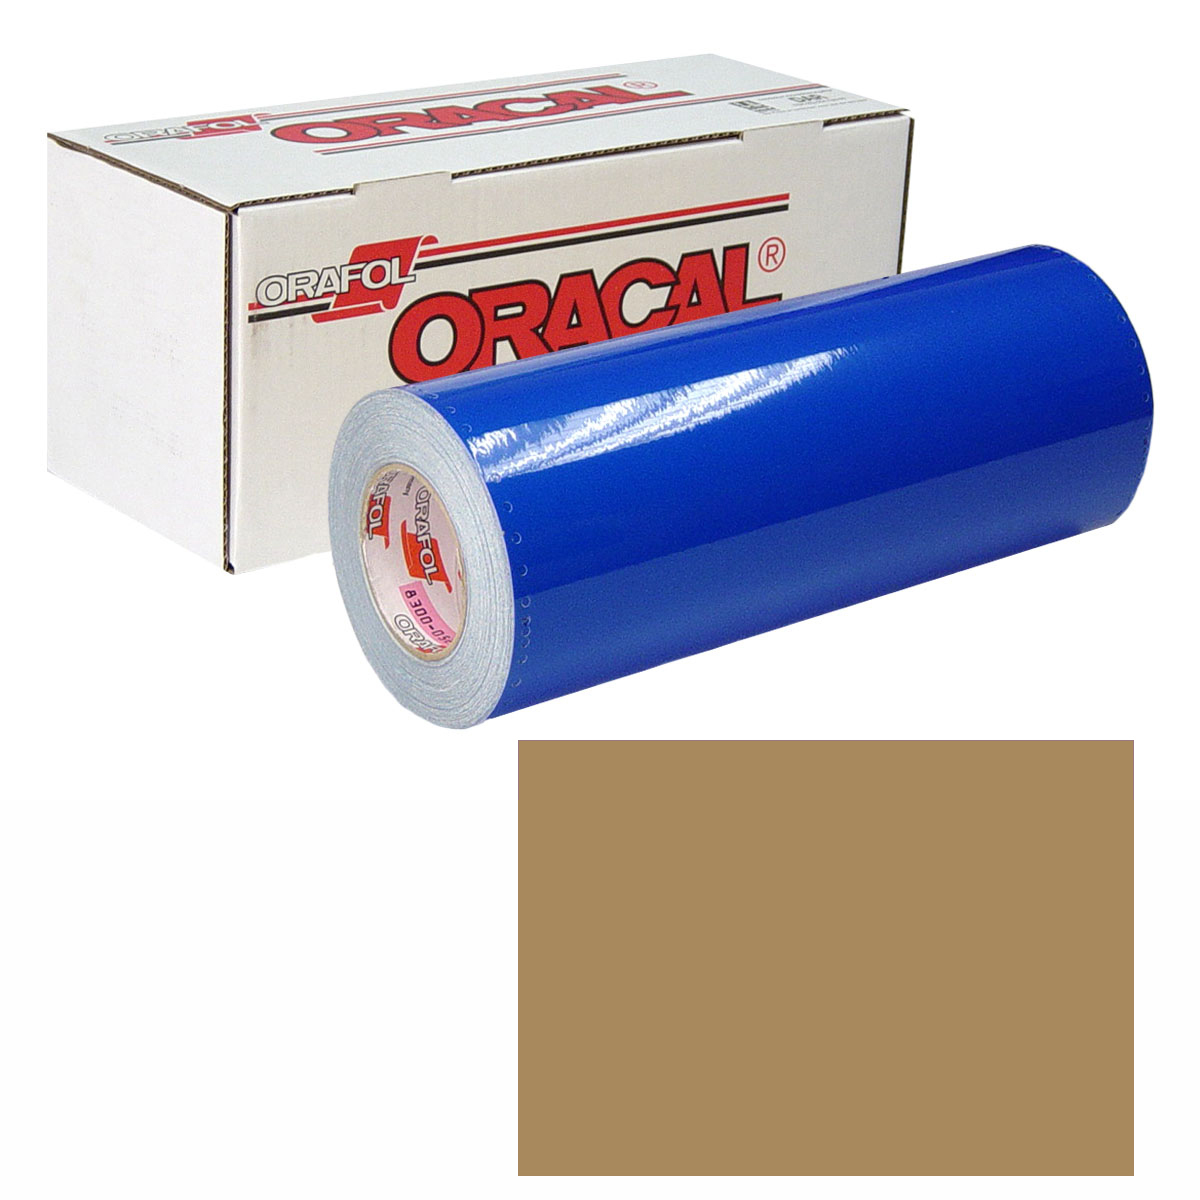 ORACAL 631 15in X 50yd 081 Light Brown